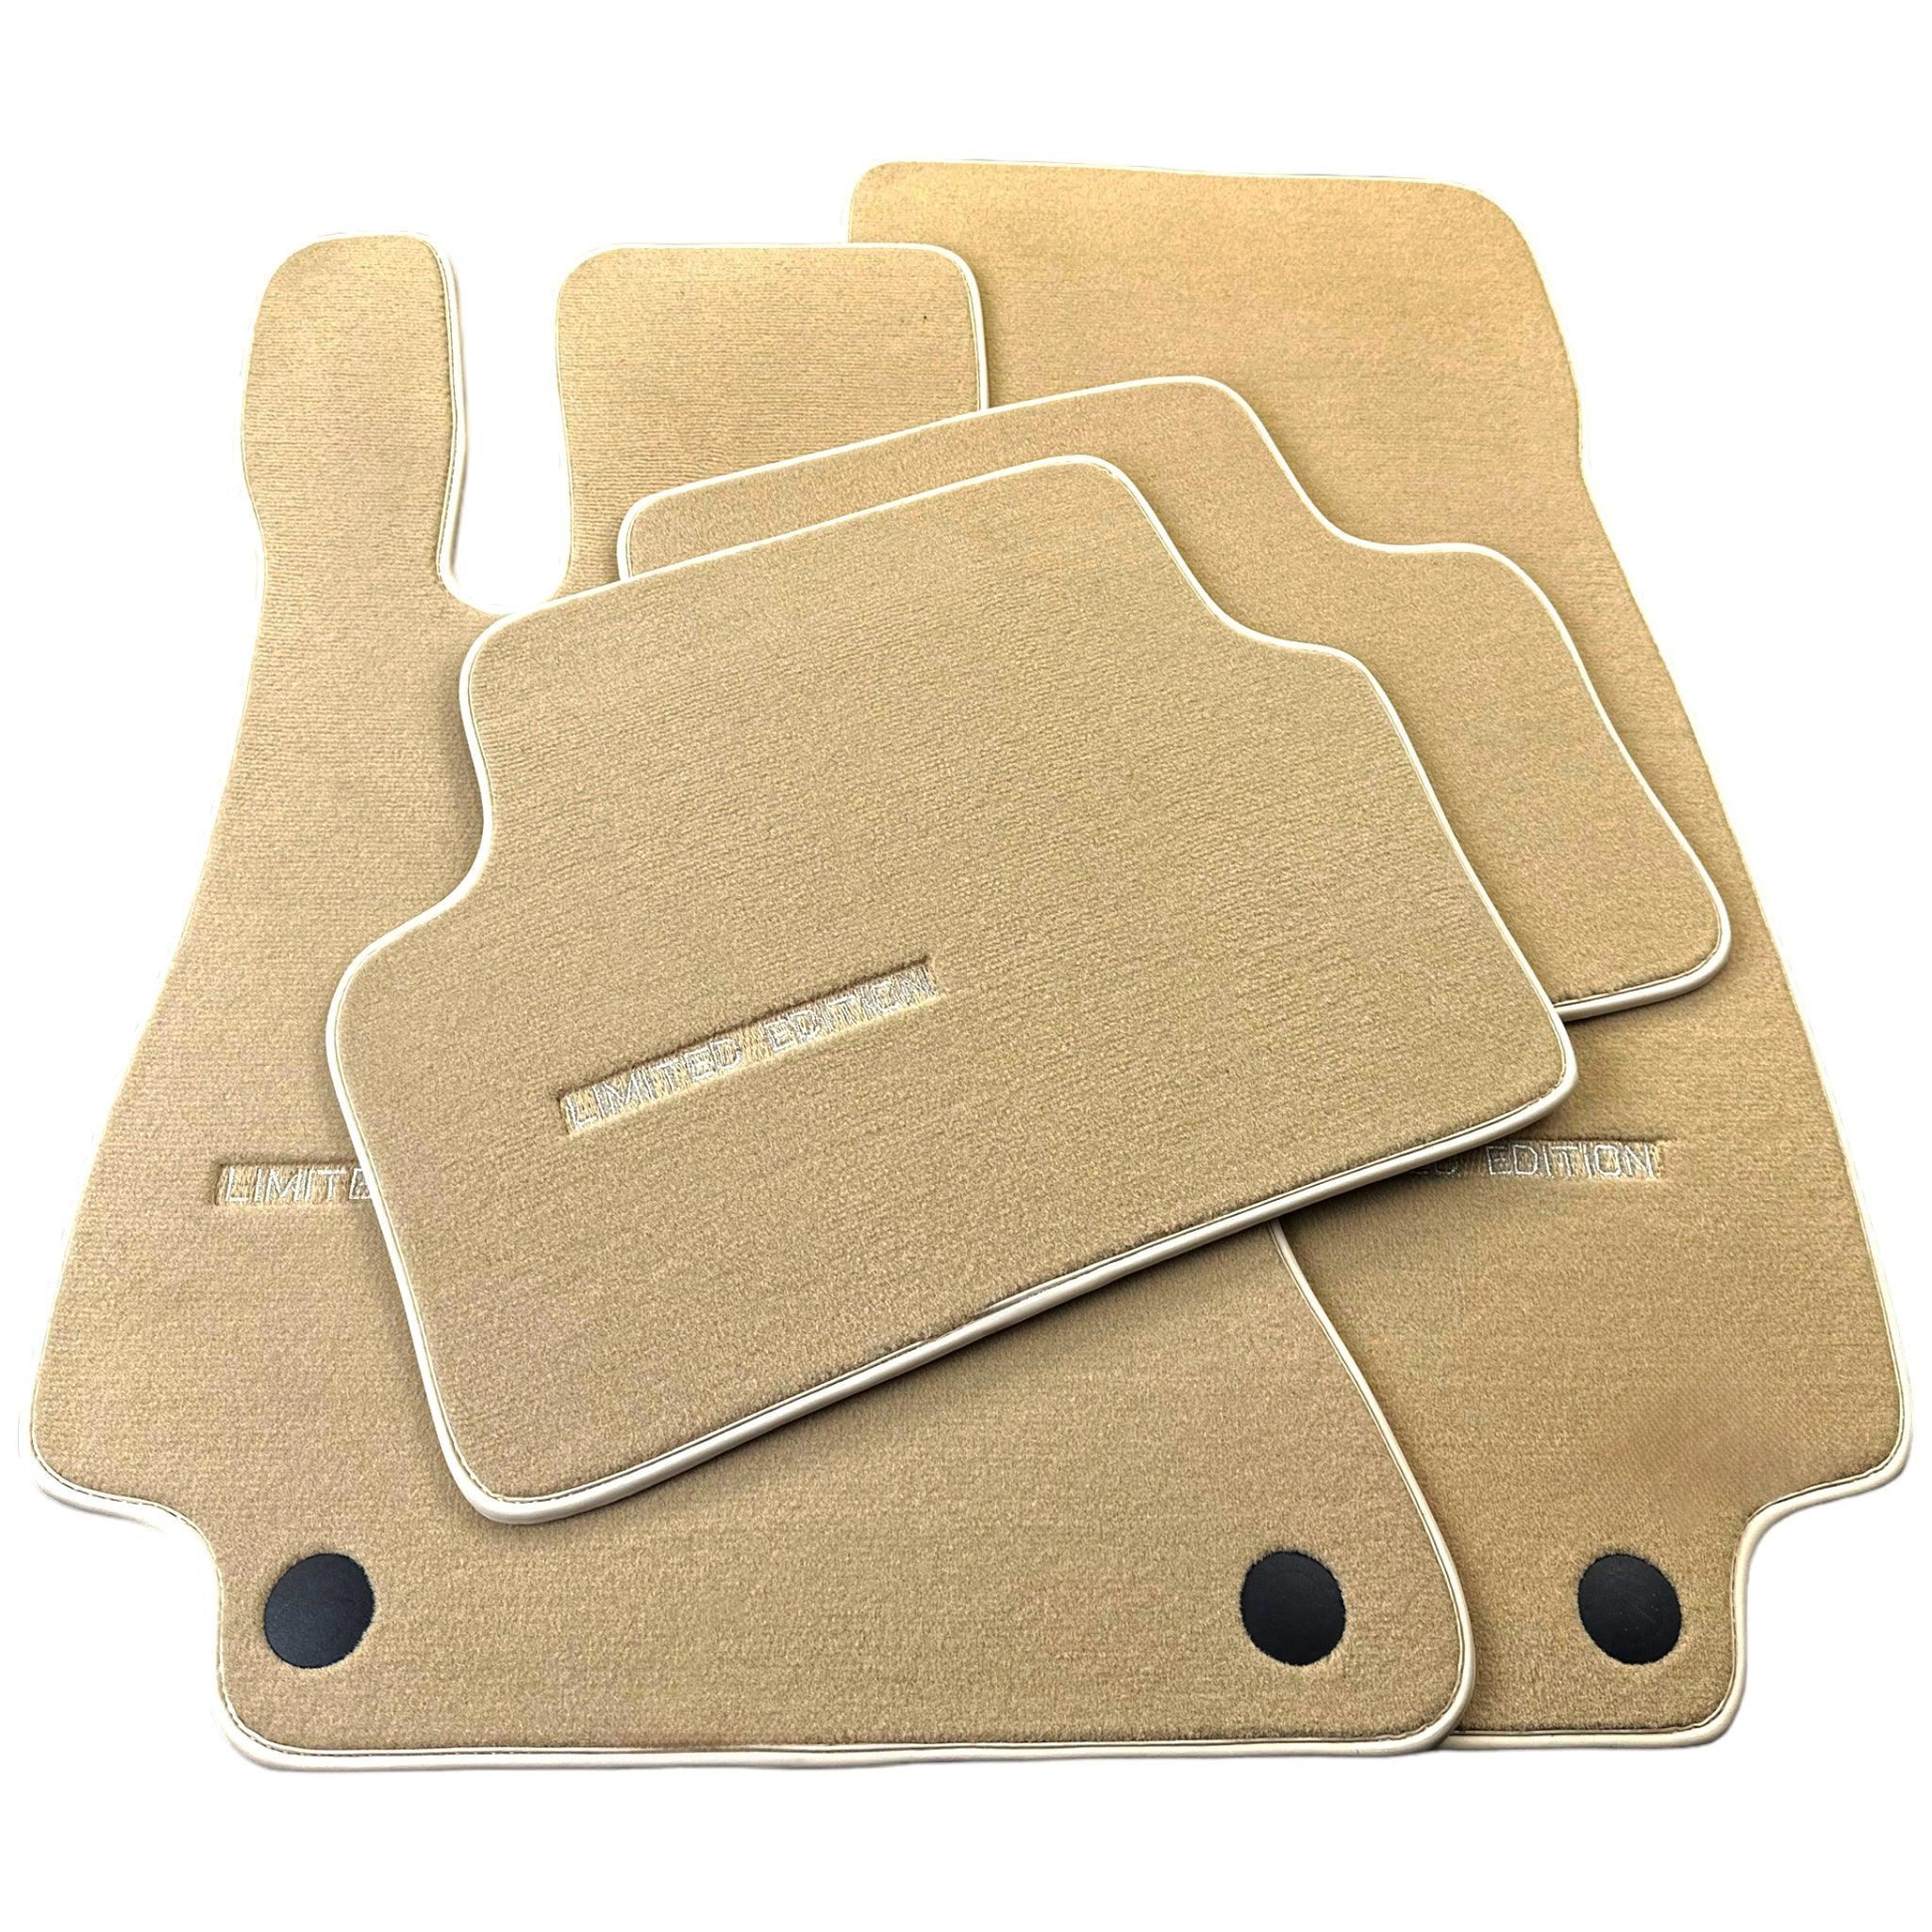 Beige Floor Mats For Mercedes Benz S-Class X222 Maybach (2015-2021) | Limited Edition